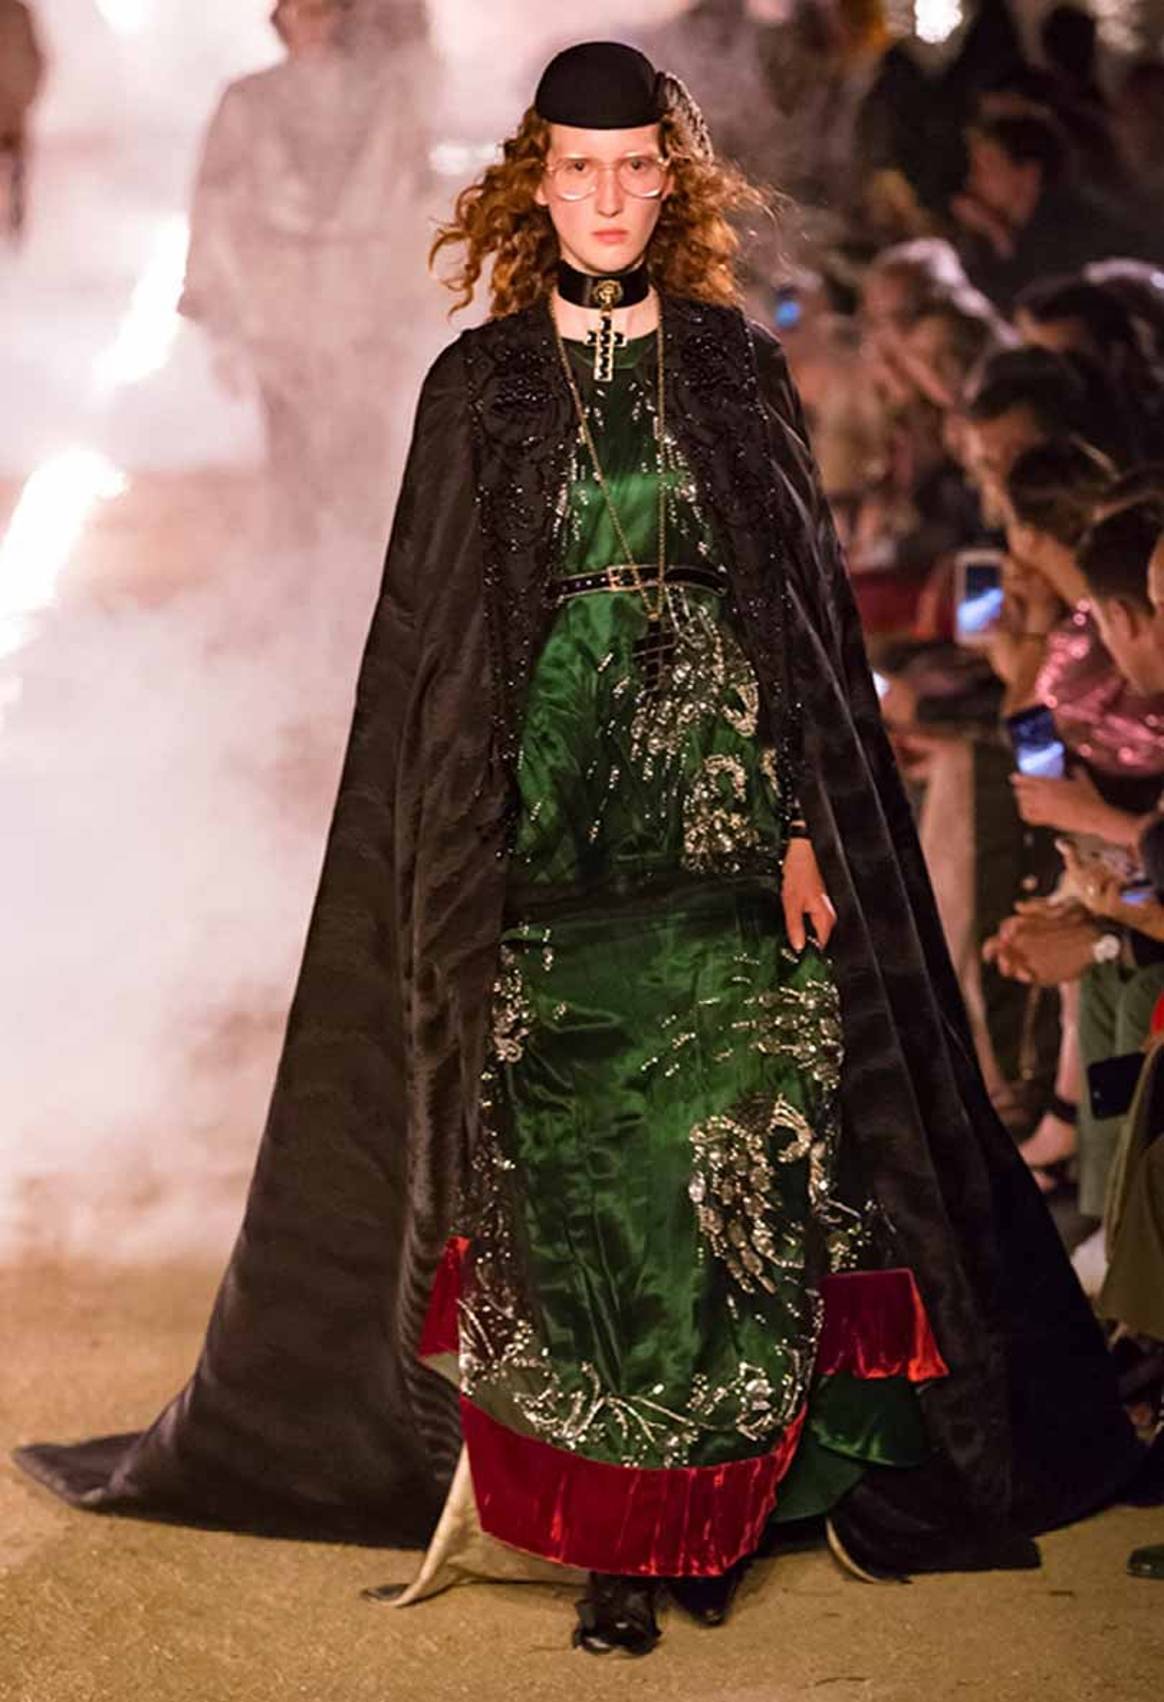 In Pictures: Gucci explores death fascination in its Cruise 2019 show